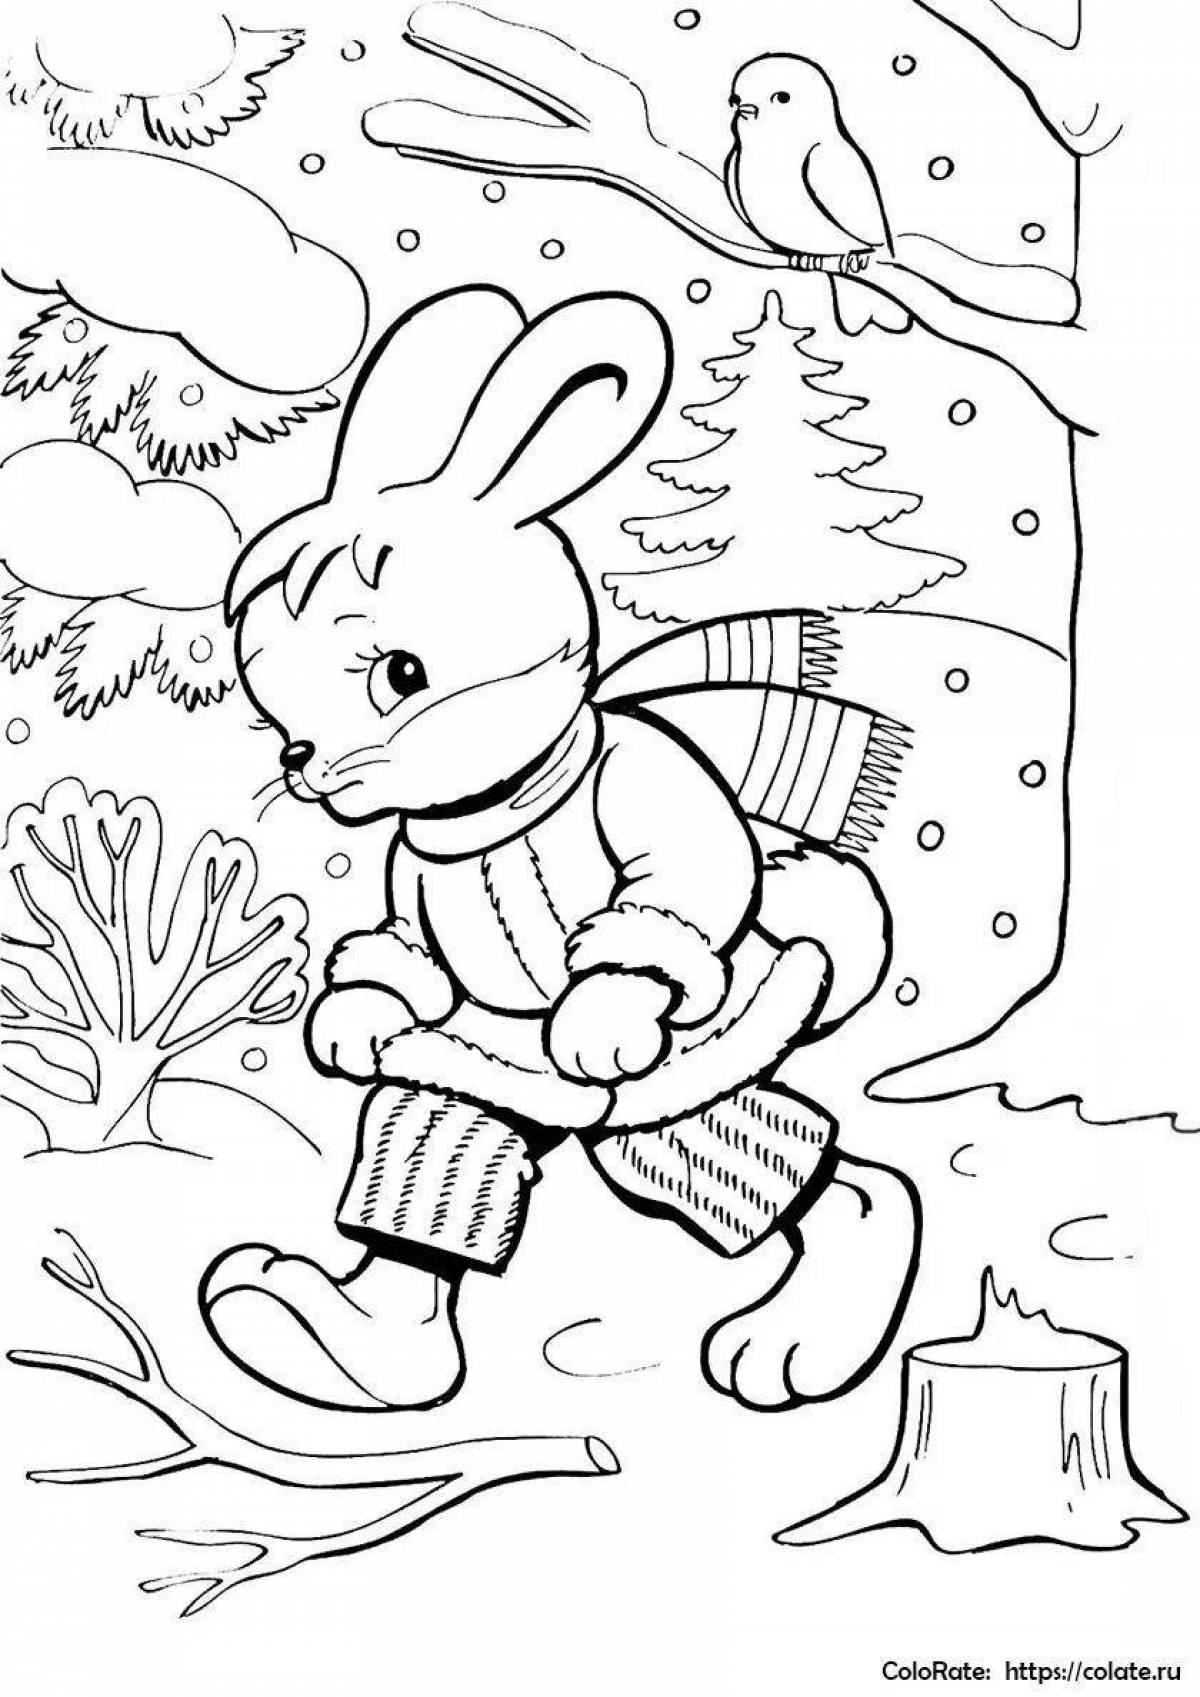 Charming coloring rabbit in the forest